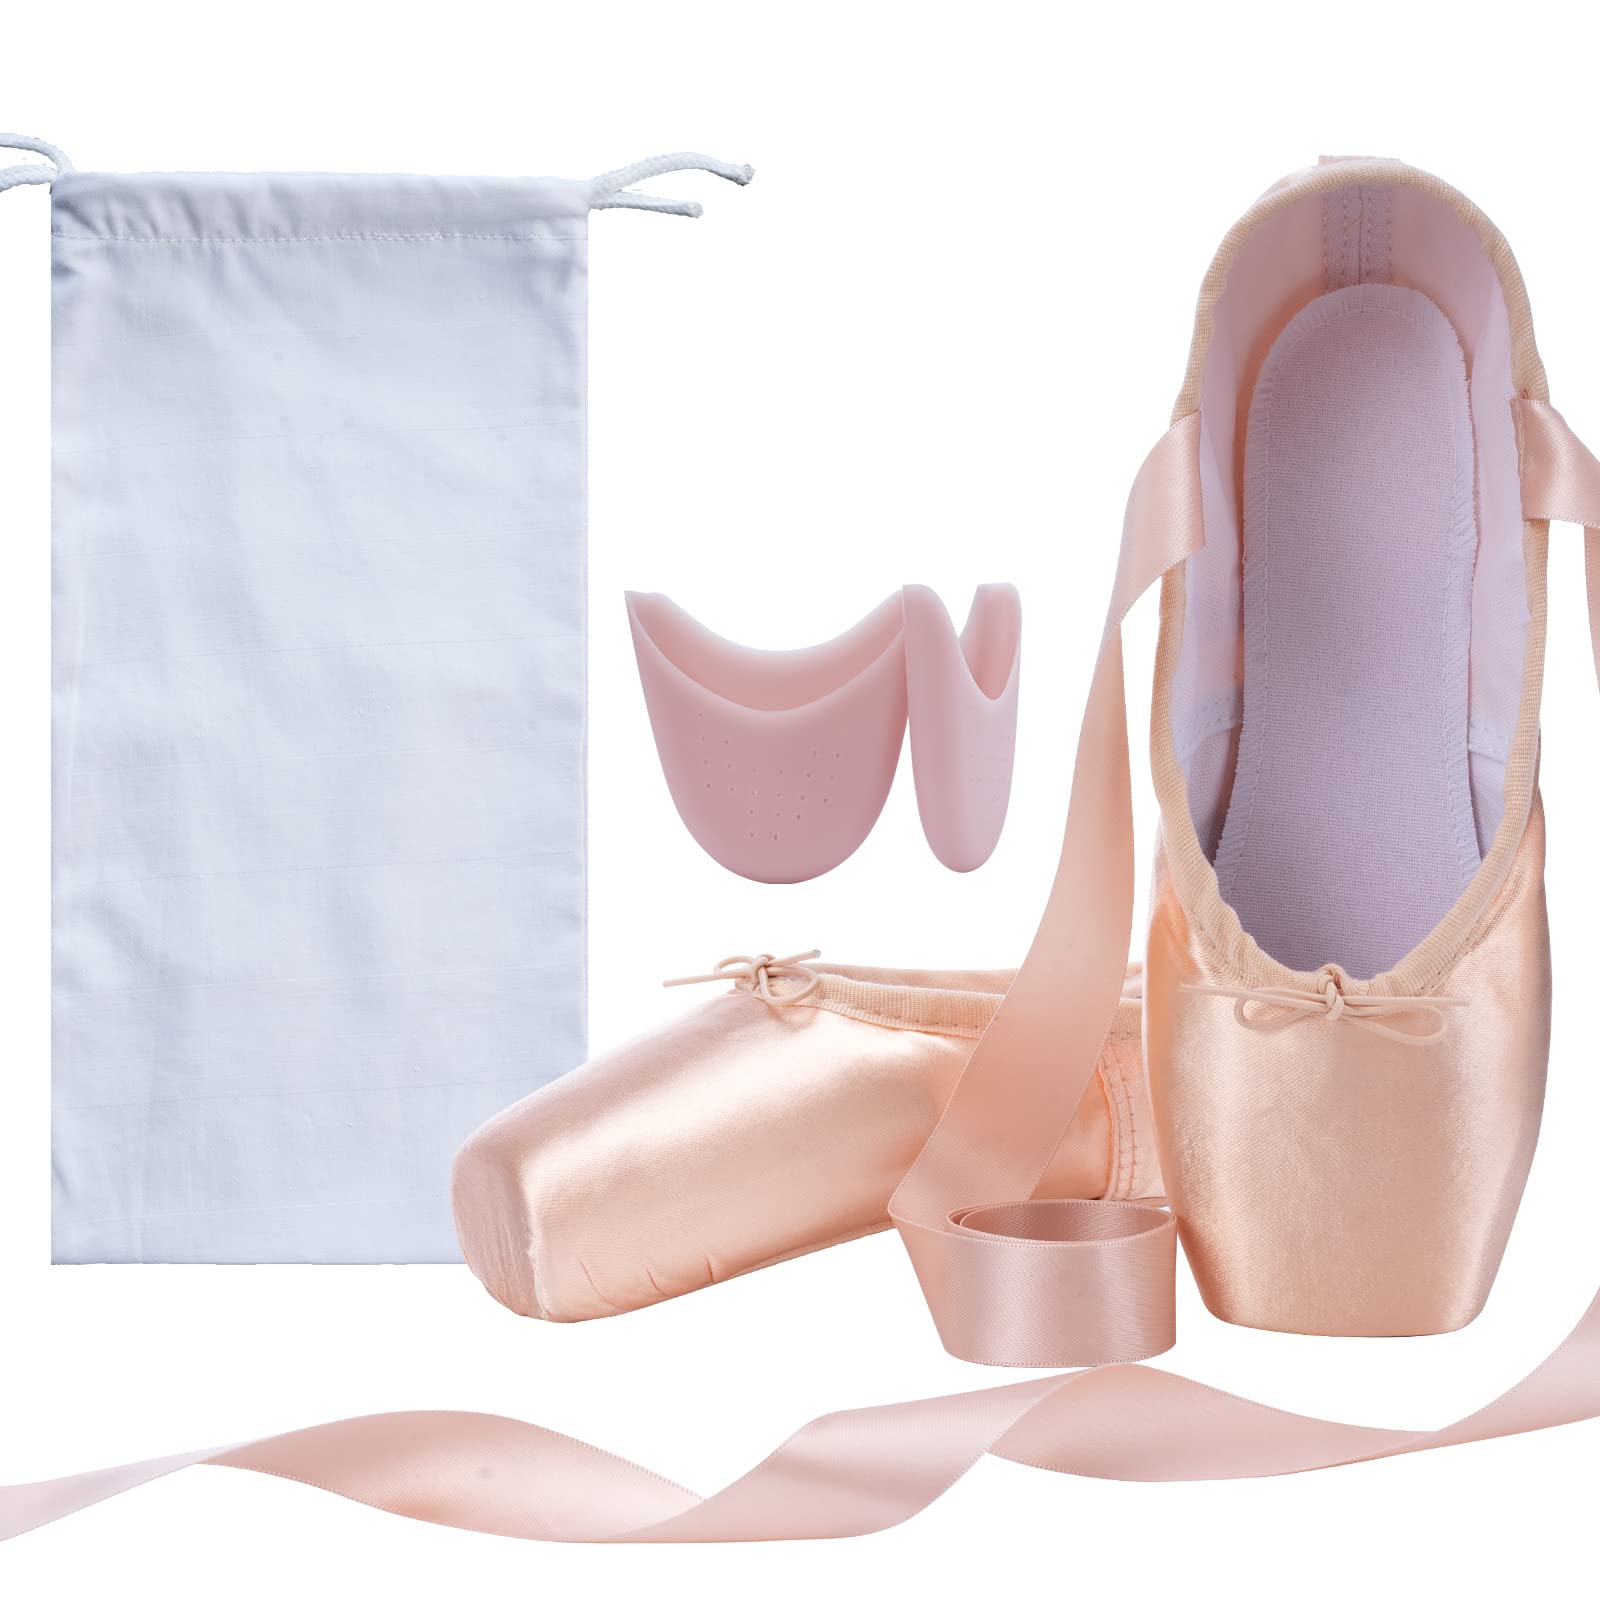 DoGeek Satin Pointe Shoes for Girls and Ladies Professional Ballet Dance Shoes with Ribbon for School or Home (Choose One Size Larger)